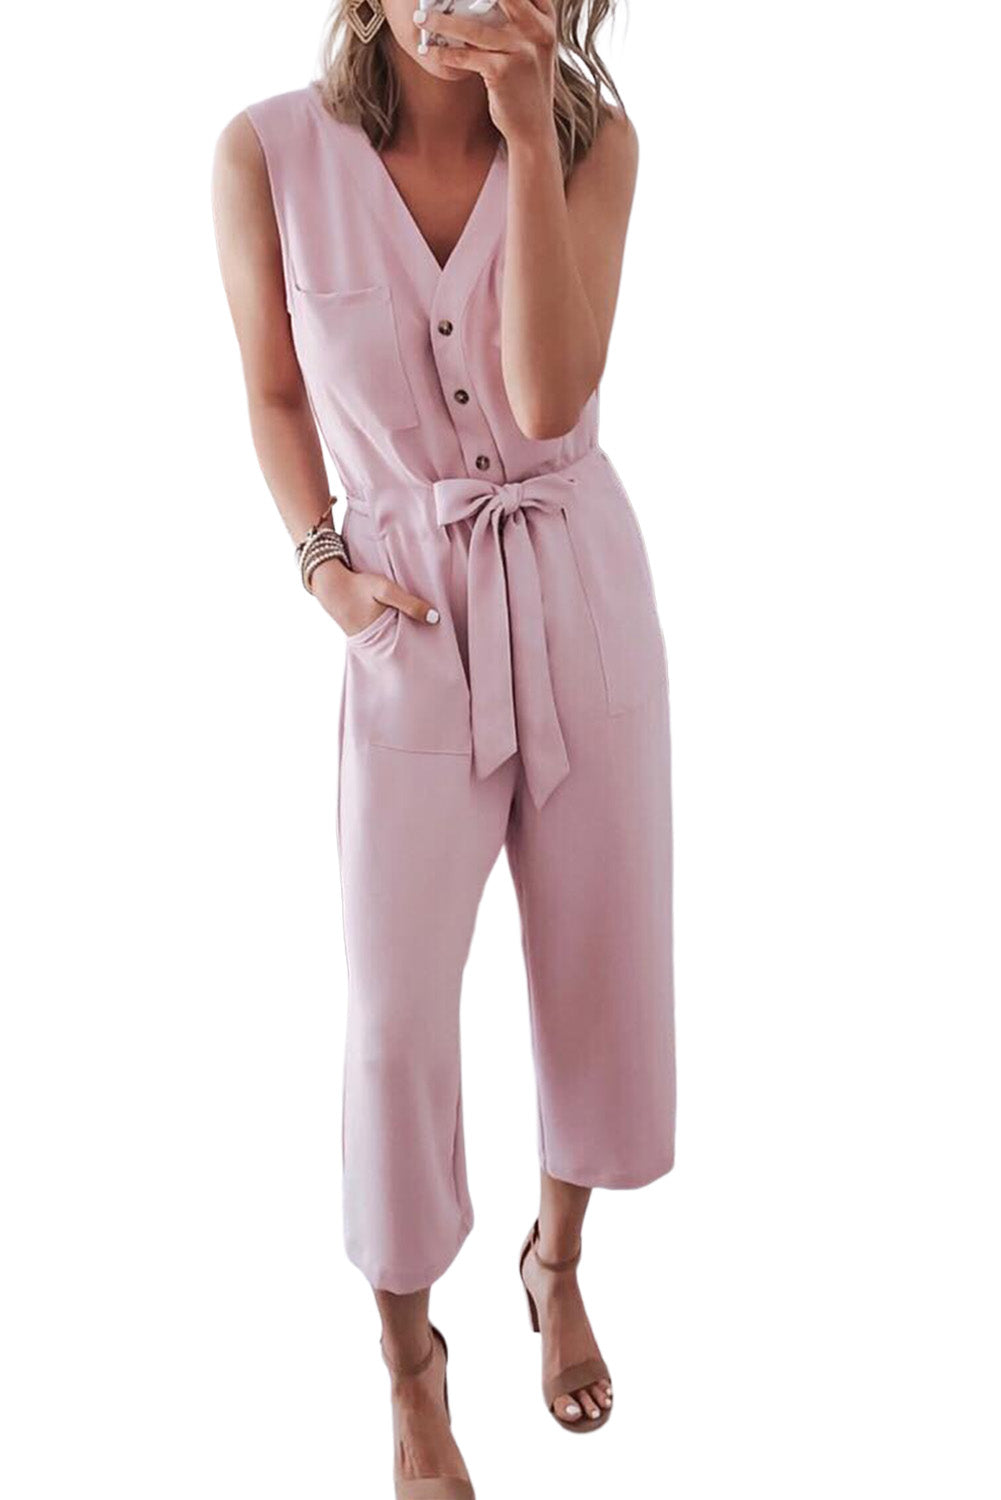 Buttoned Sleeveless Cropped Jumpsuit With Sash